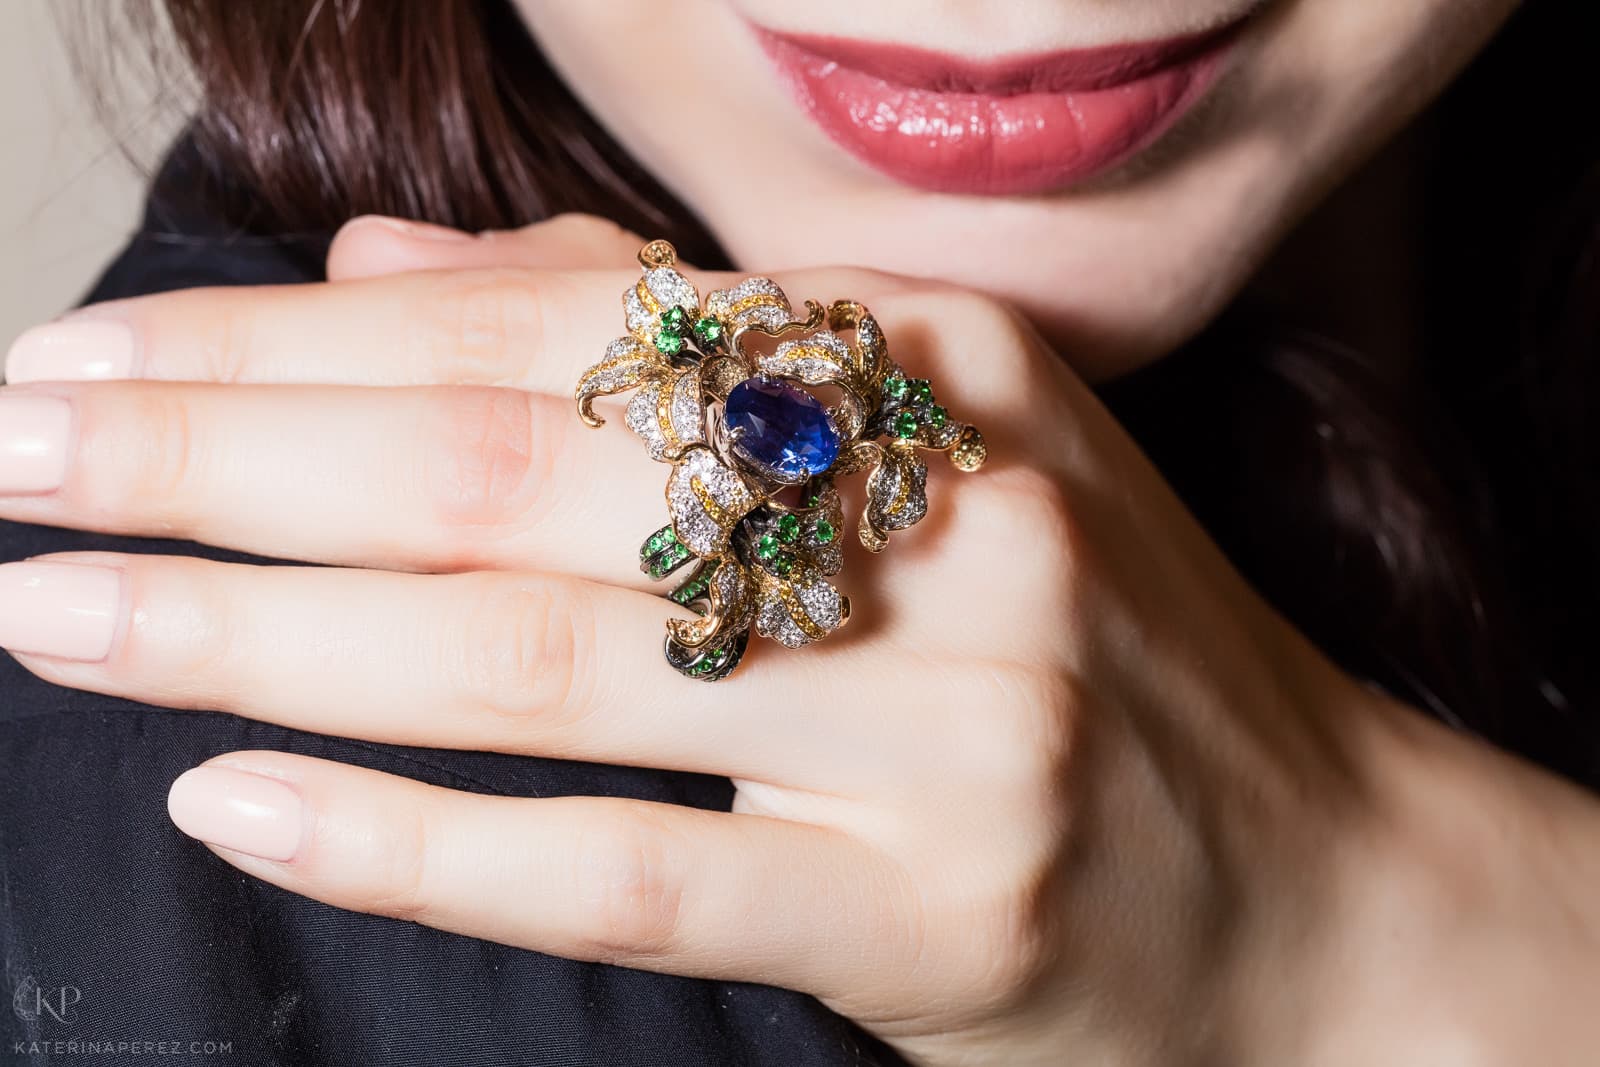 Caratell flower ring with an oval sapphire, tsavorires and diamonds